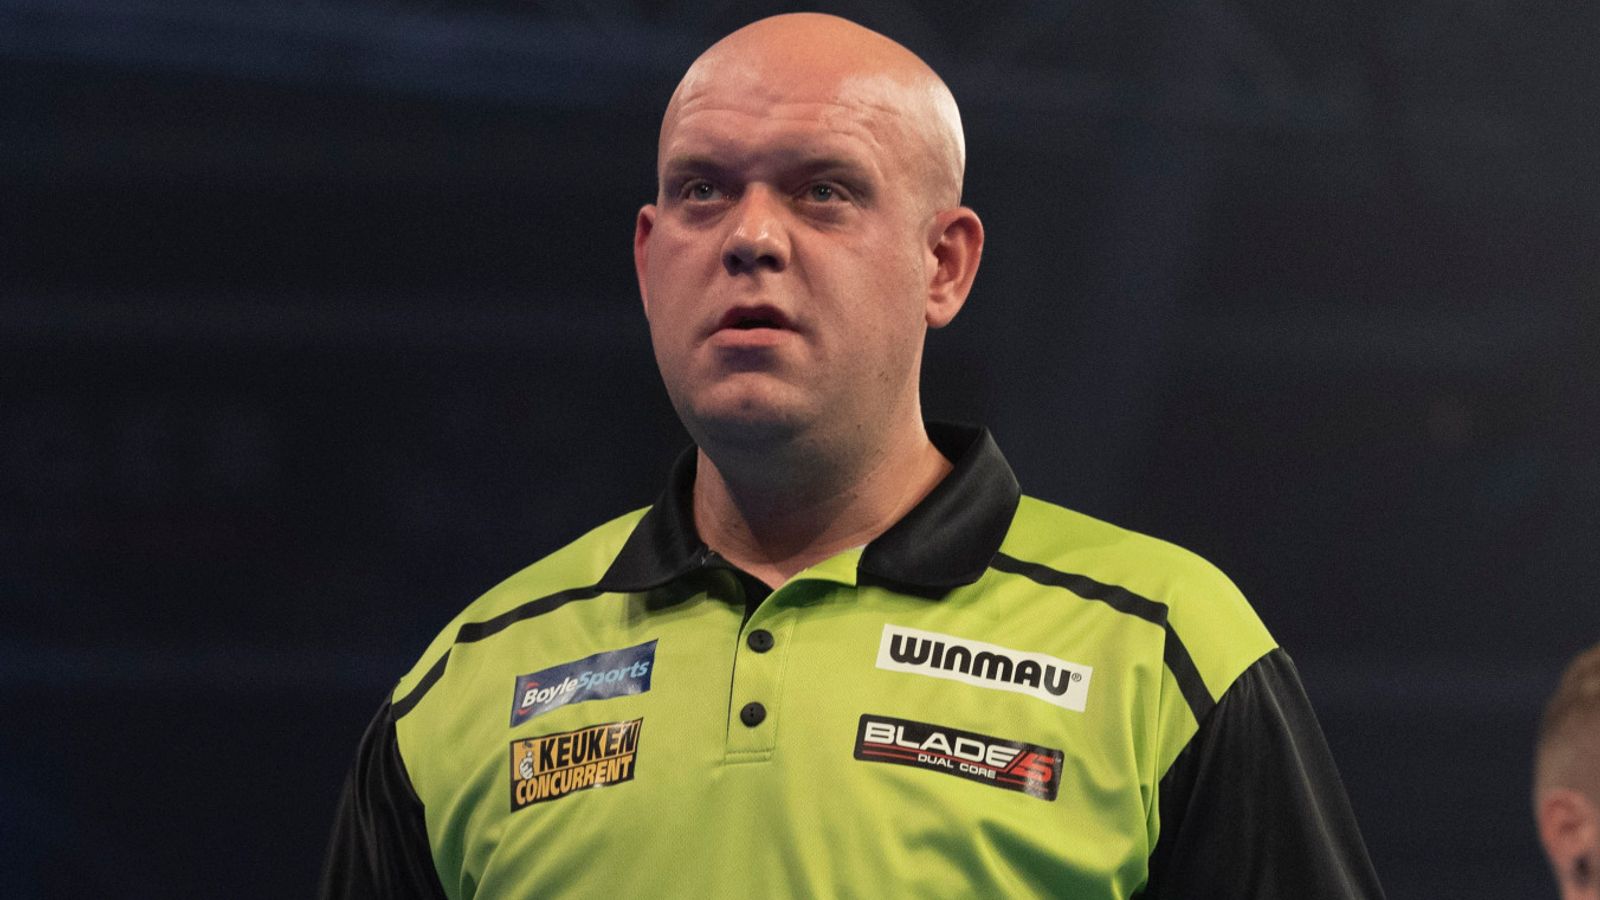 Schatting trui Bijproduct Michael van Gerwen out of World Darts Championship after testing positive  for Covid-19 | Darts News - News Concerns